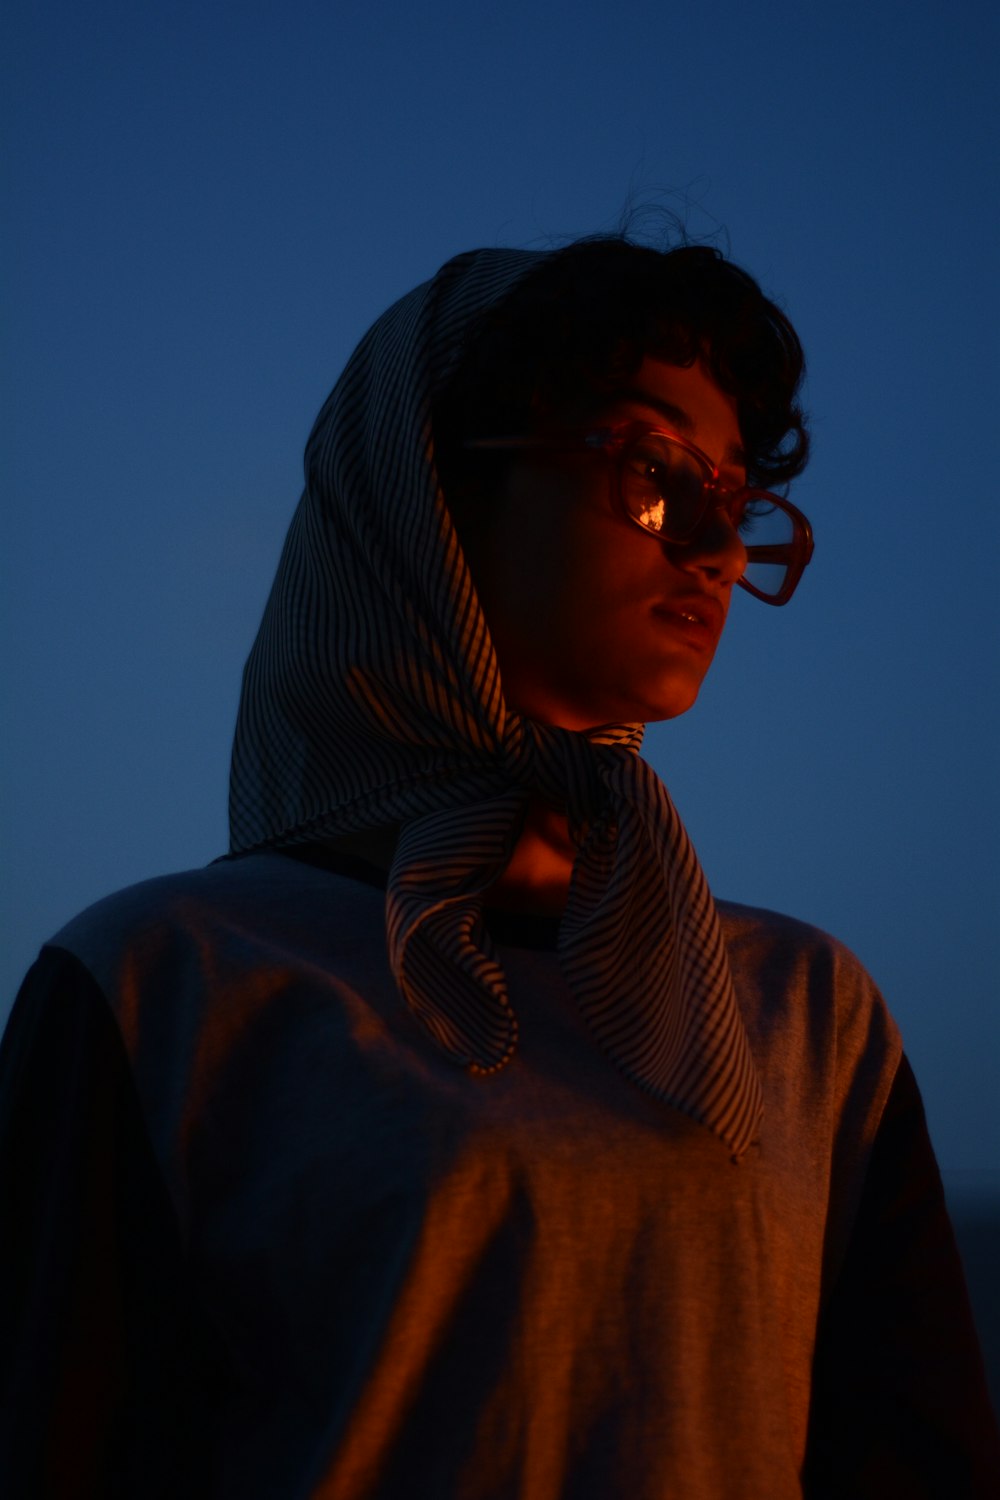 a person wearing a hoodie and glasses at night